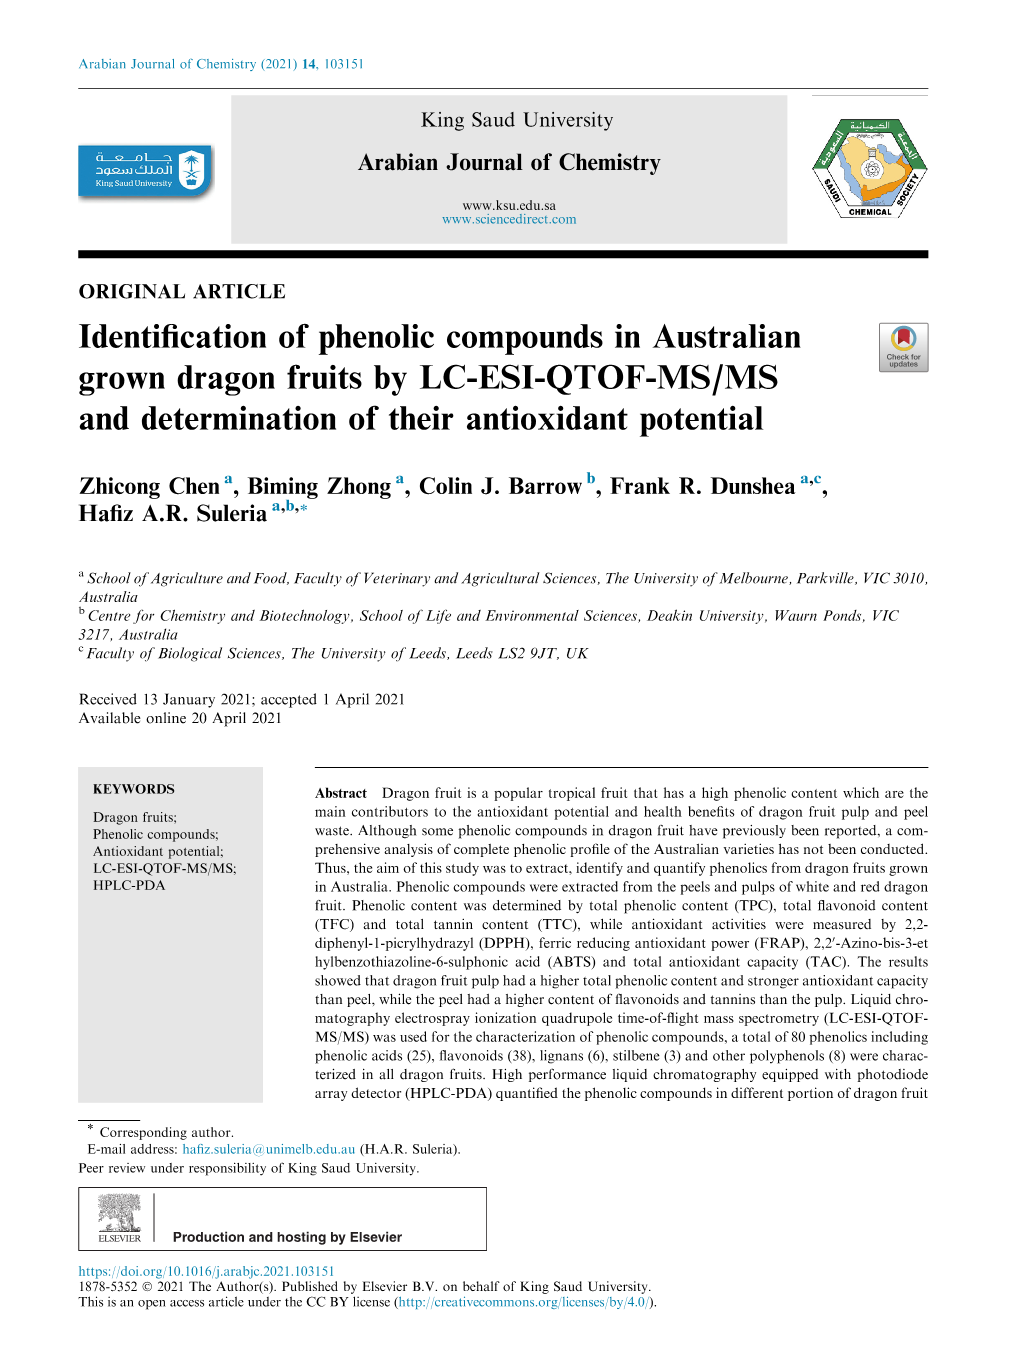 Identification of Phenolic Compounds in Australian Grown Dragon Fruits by LC-ESI-QTOF- MS/MS and Determination of Their Antioxidant Potential